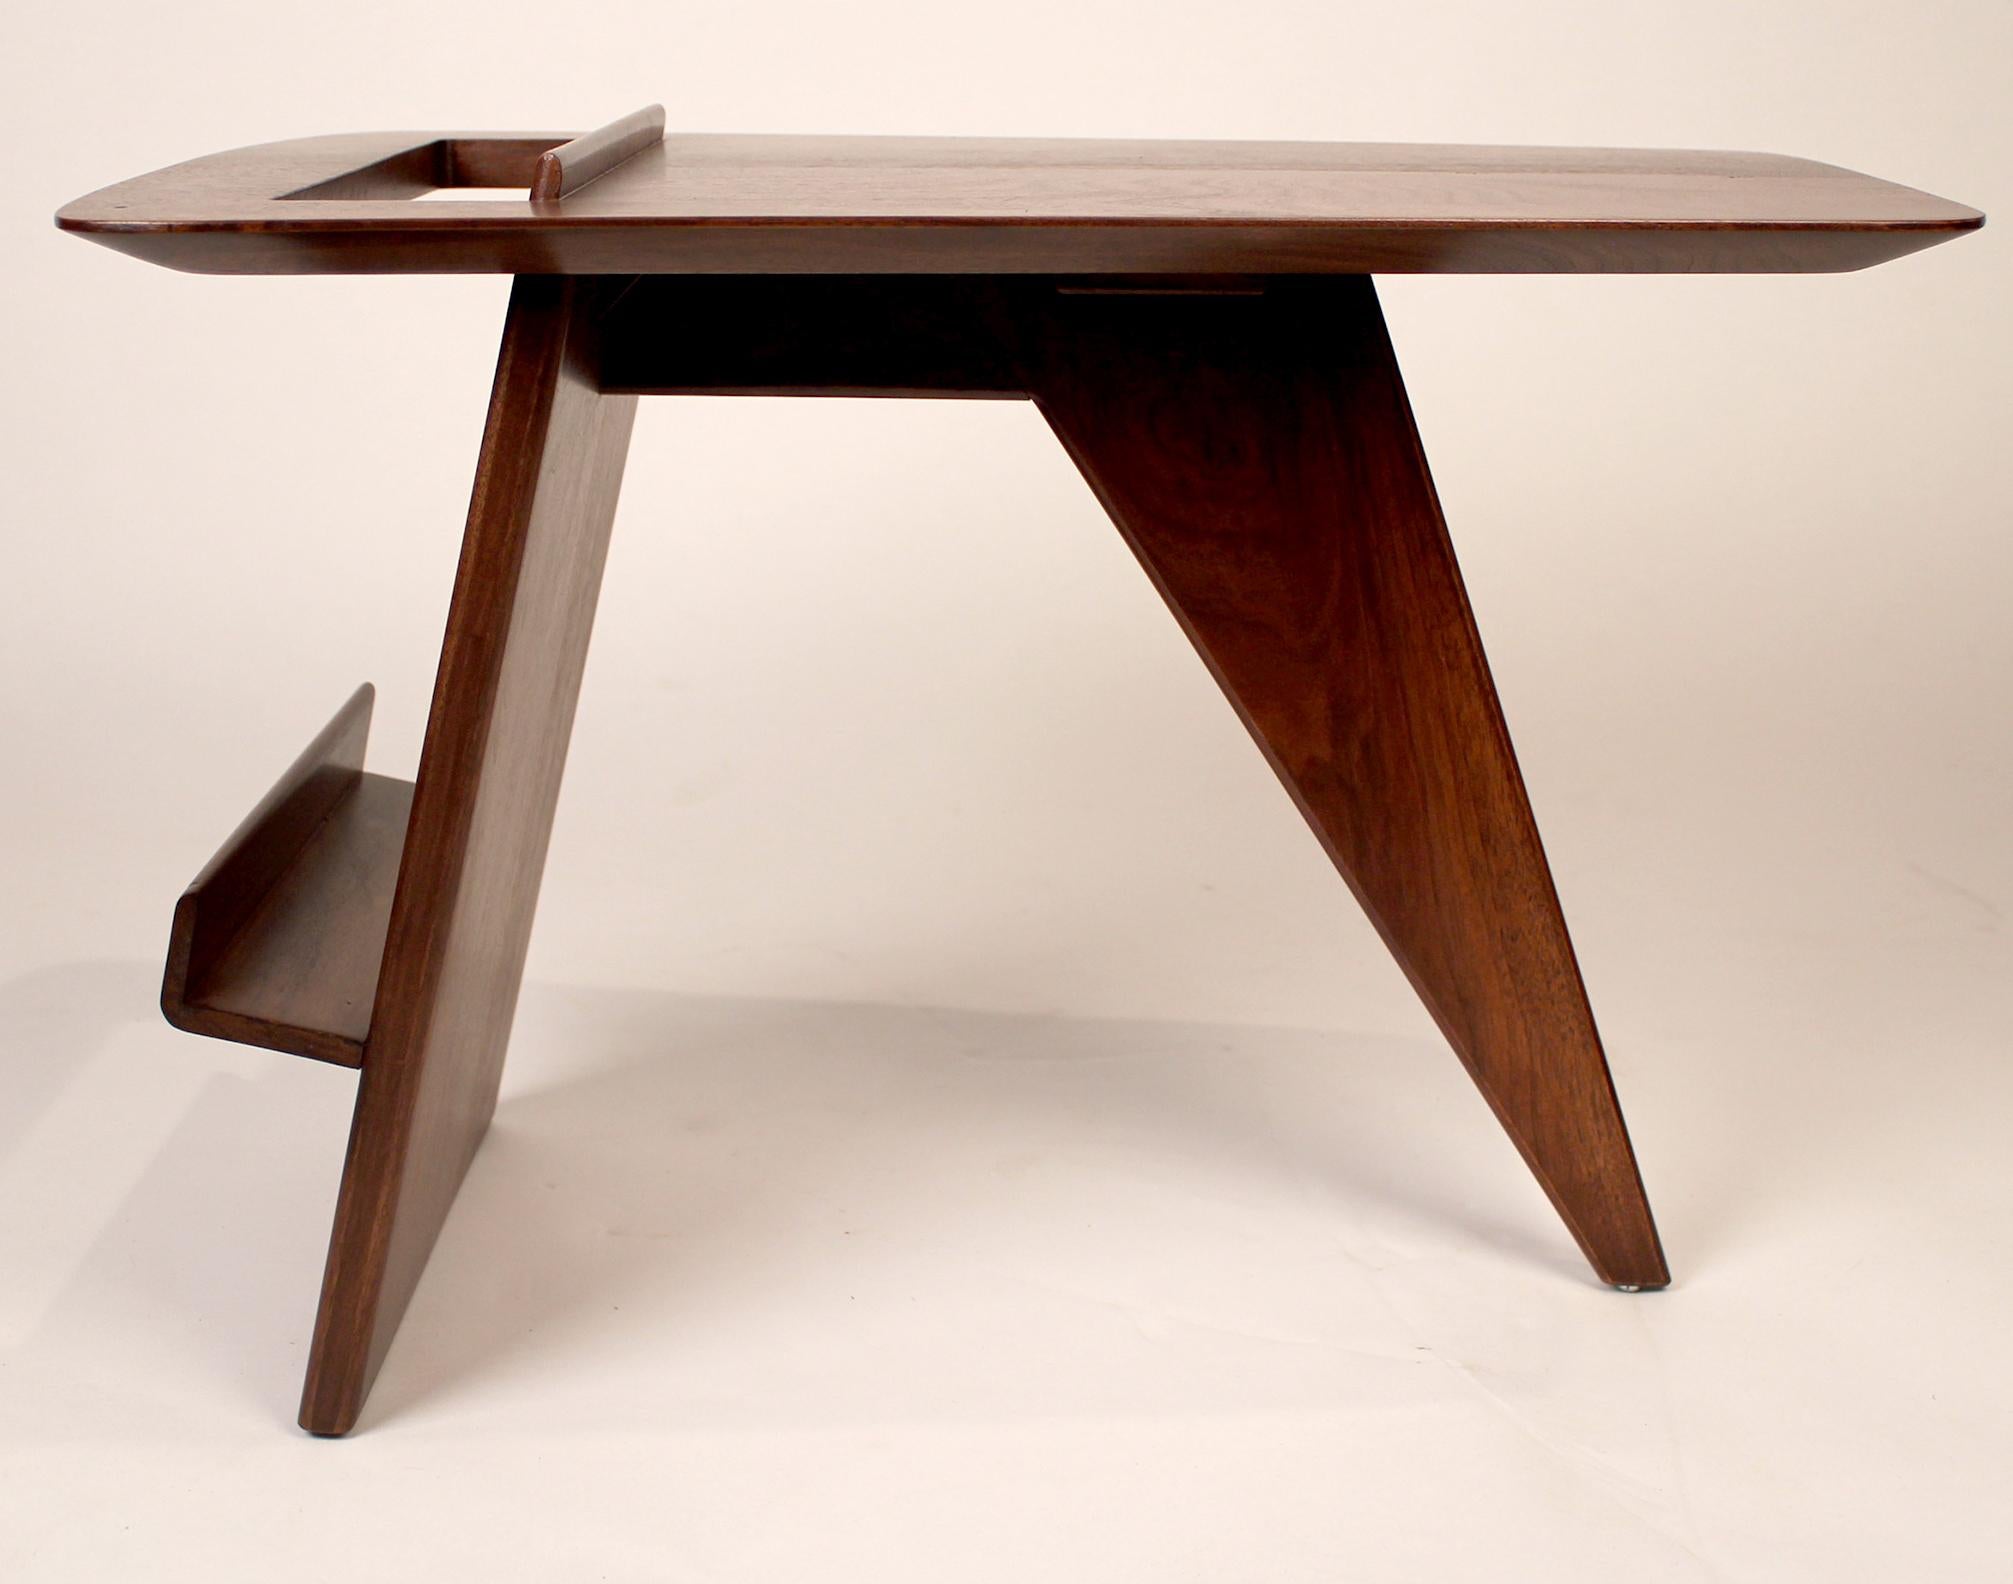 Rare magazine table designed and produced by Jens Risom.